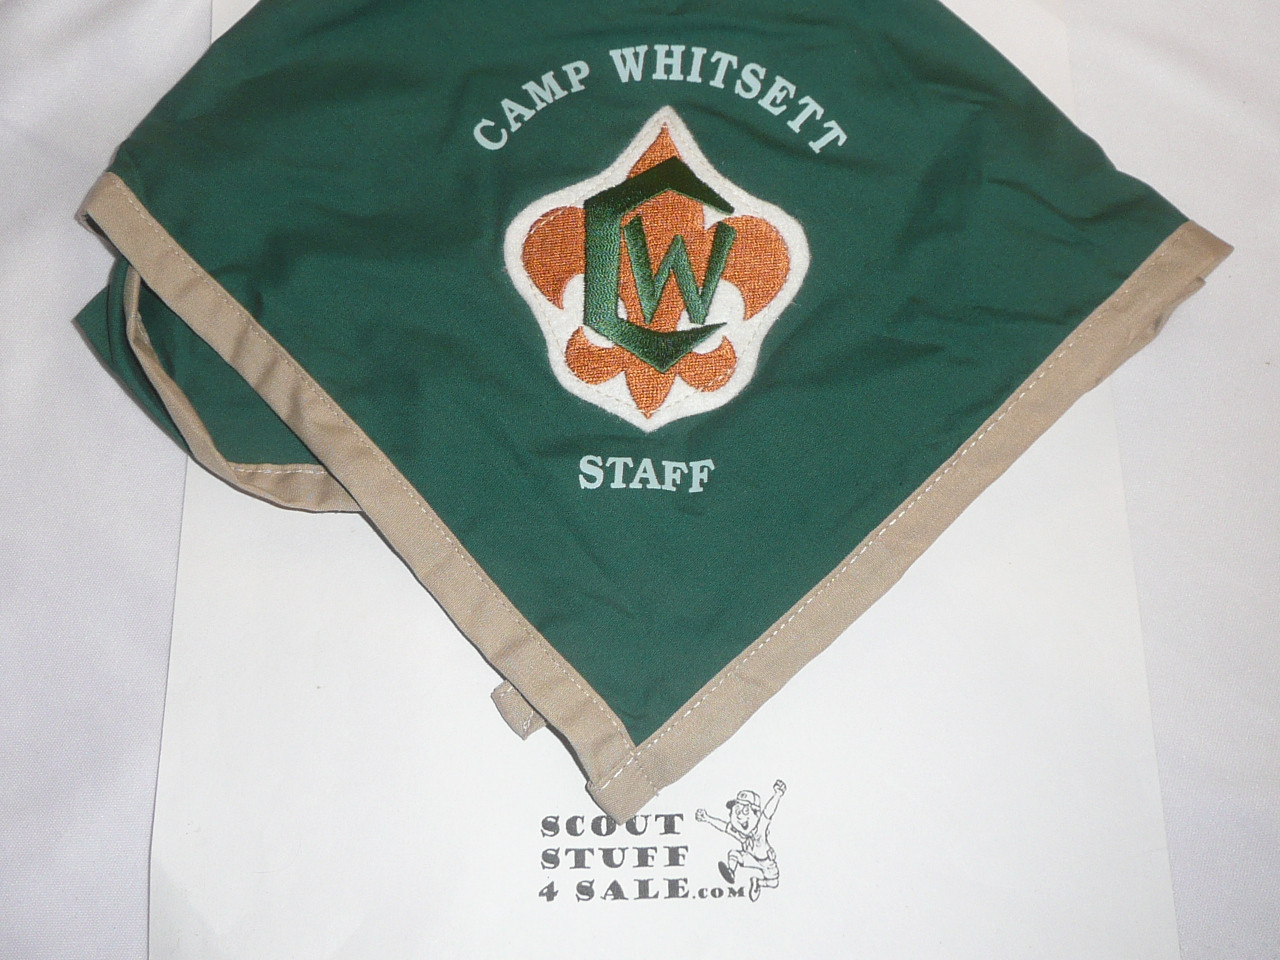 1990's Camp Whitsett STAFF Neckerchief with piping, Western Los Angeles County Council